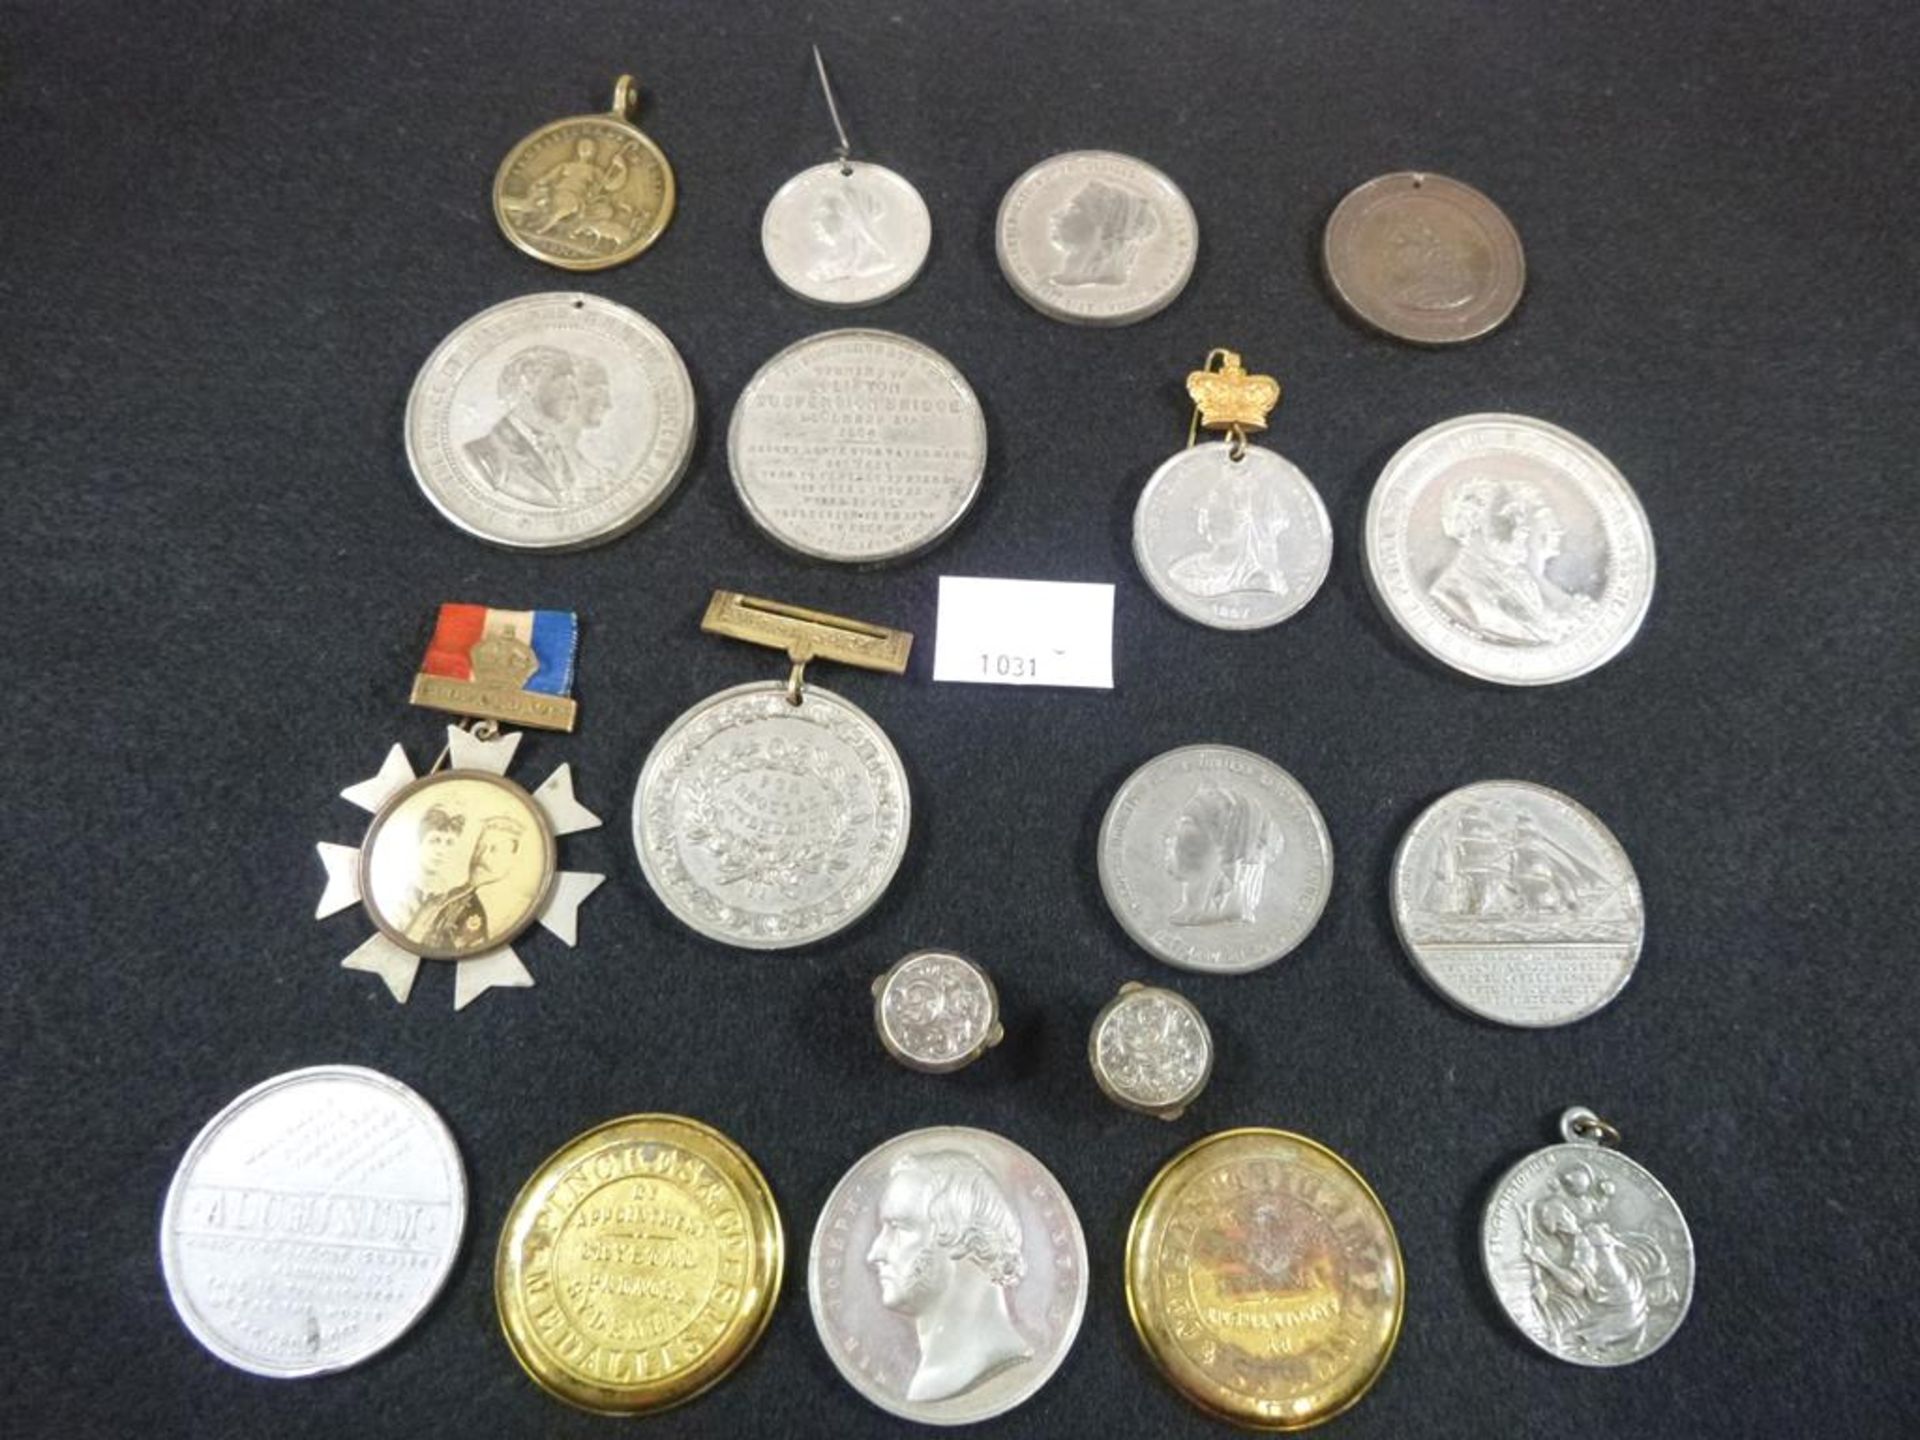 An interesting collection of 19th Century Commemorative Medals including The Opening of Clifton